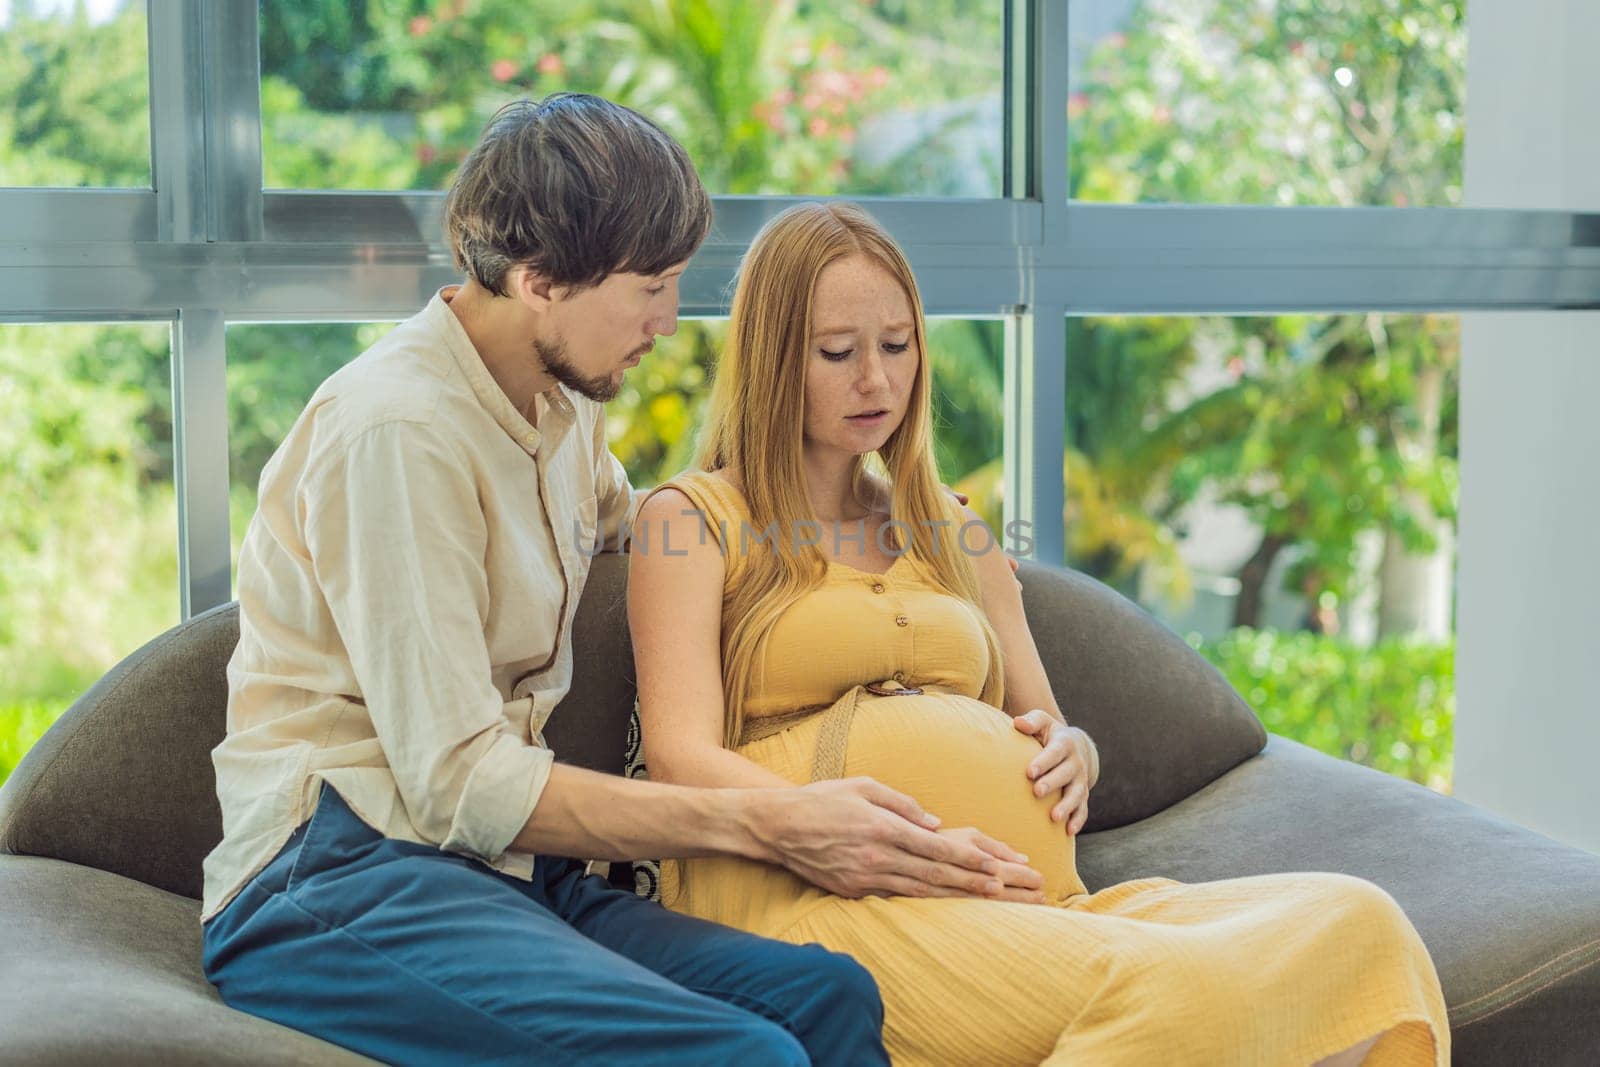 Expectant woman feels unwell, husband comforts and reassures her during a challenging pregnancy by galitskaya